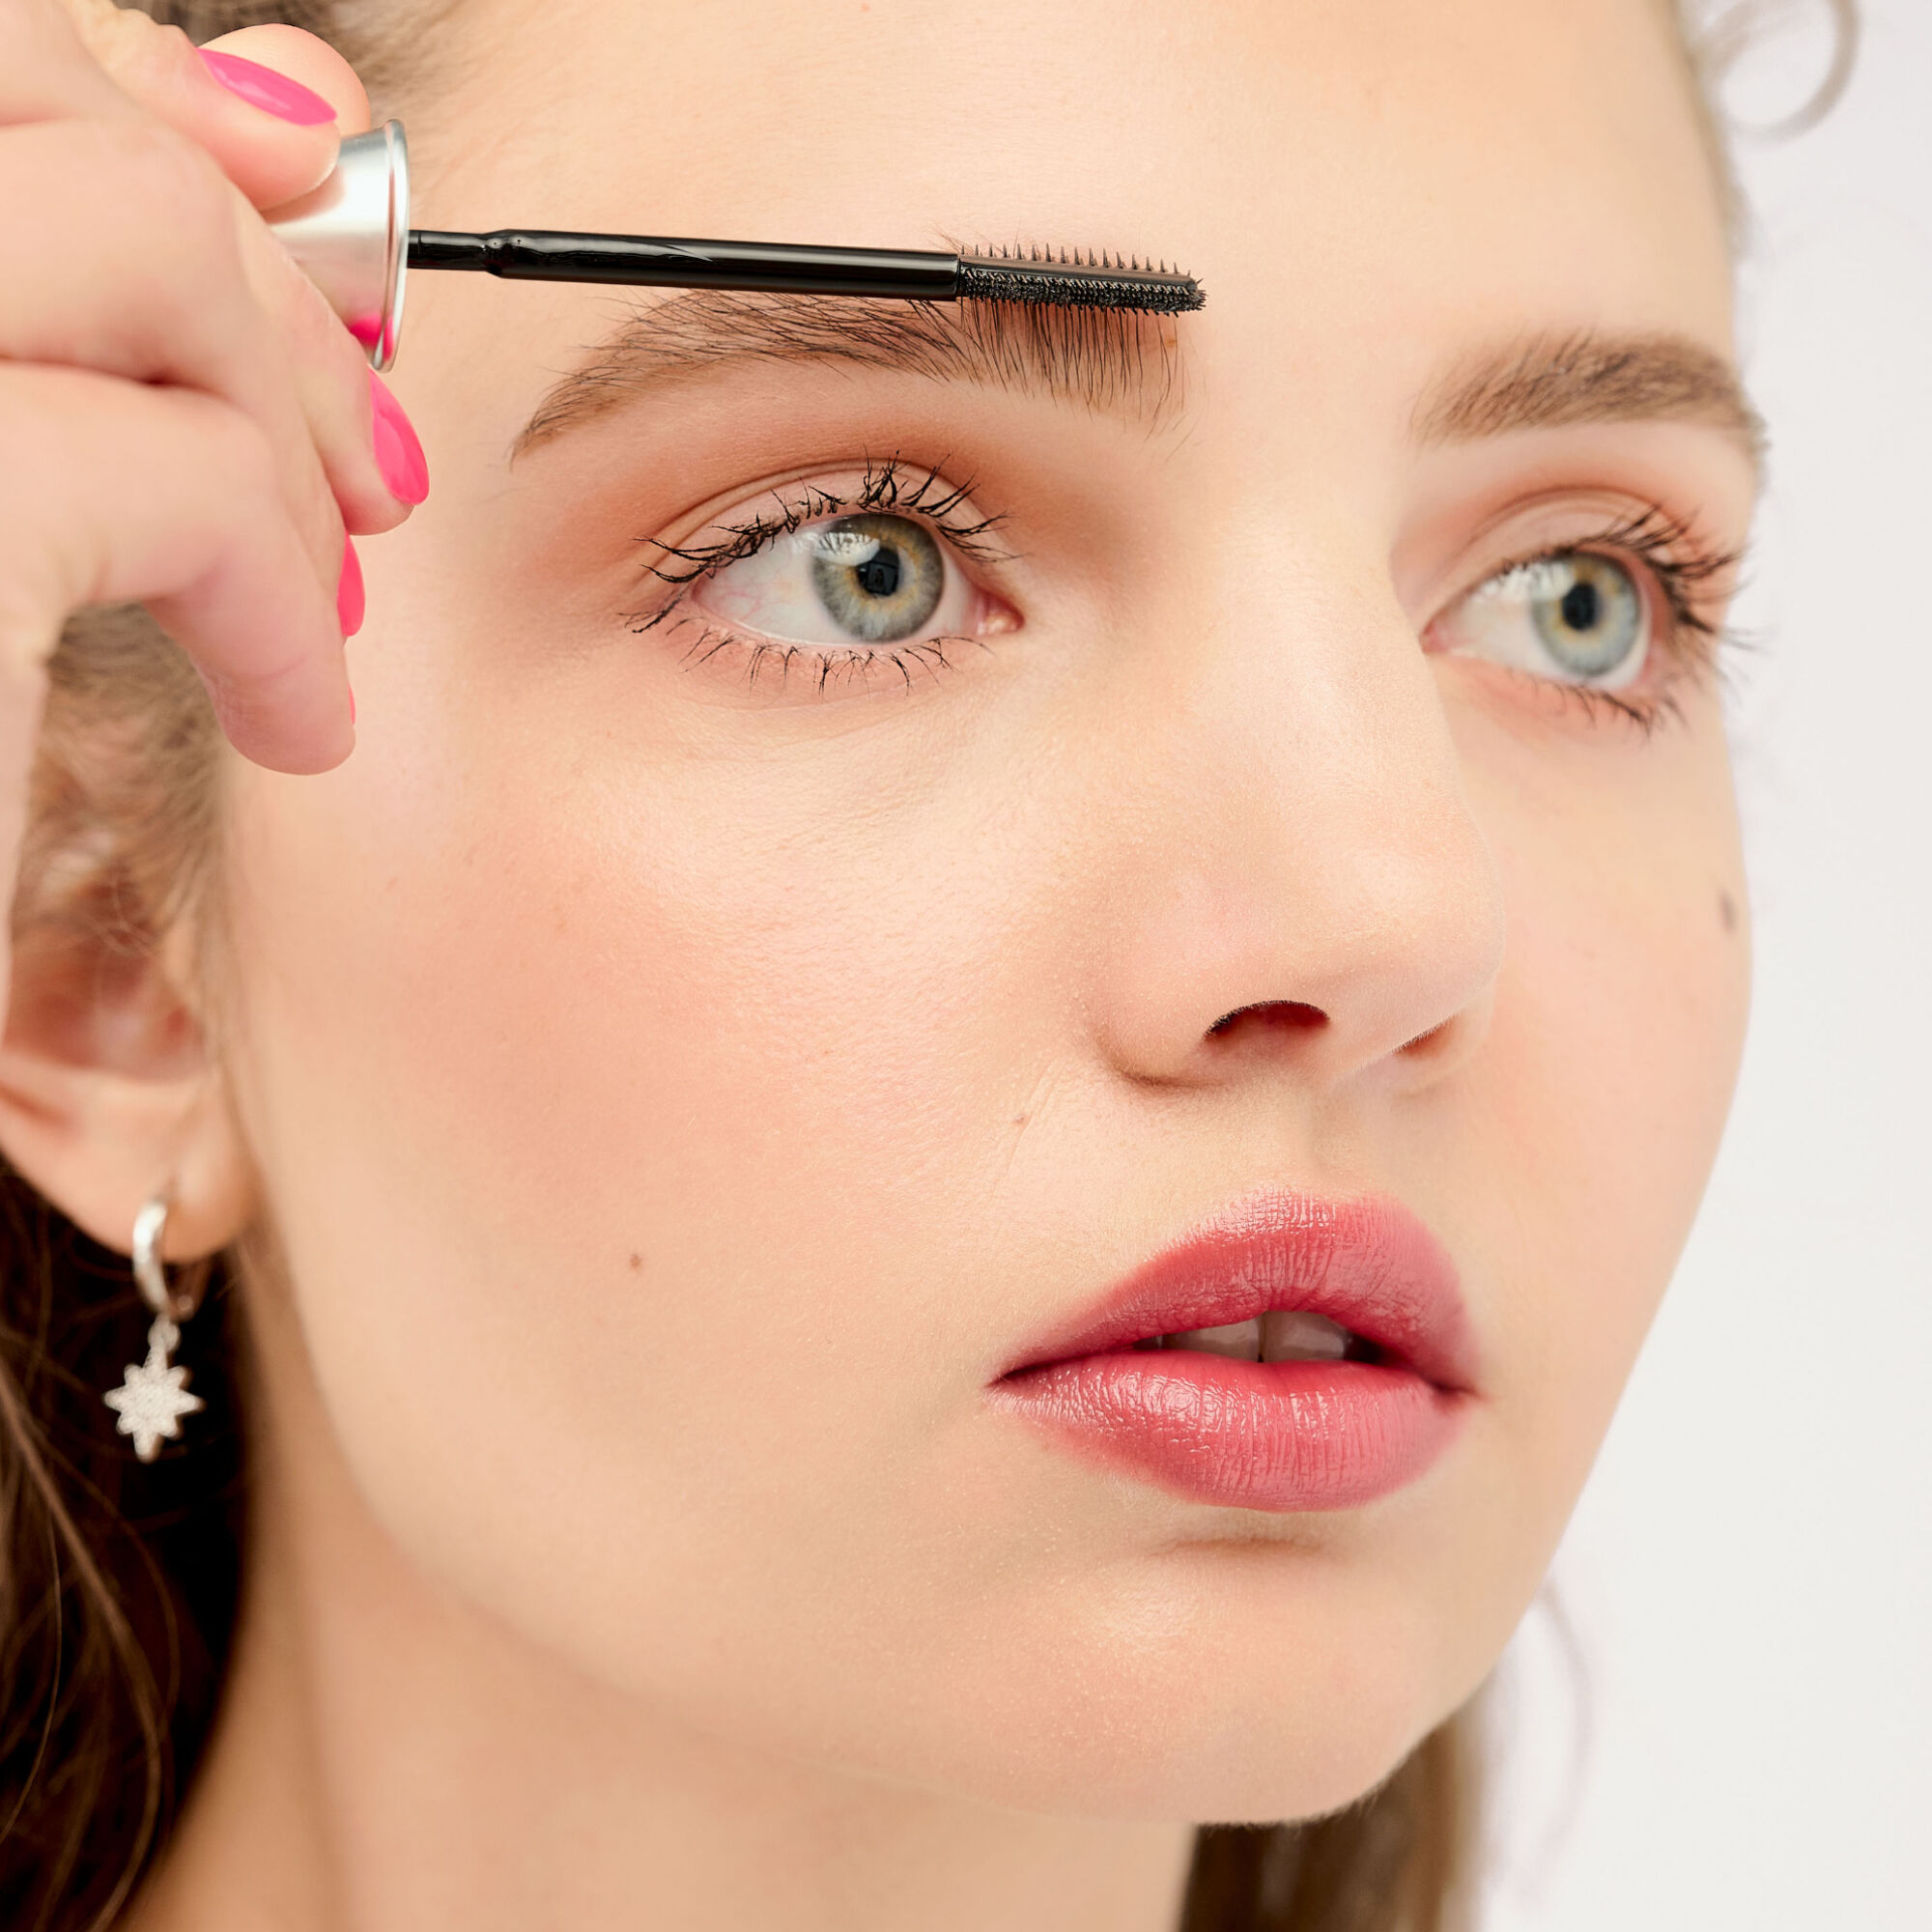 Brush 24-HR Brow Setter along brows to shape & set.